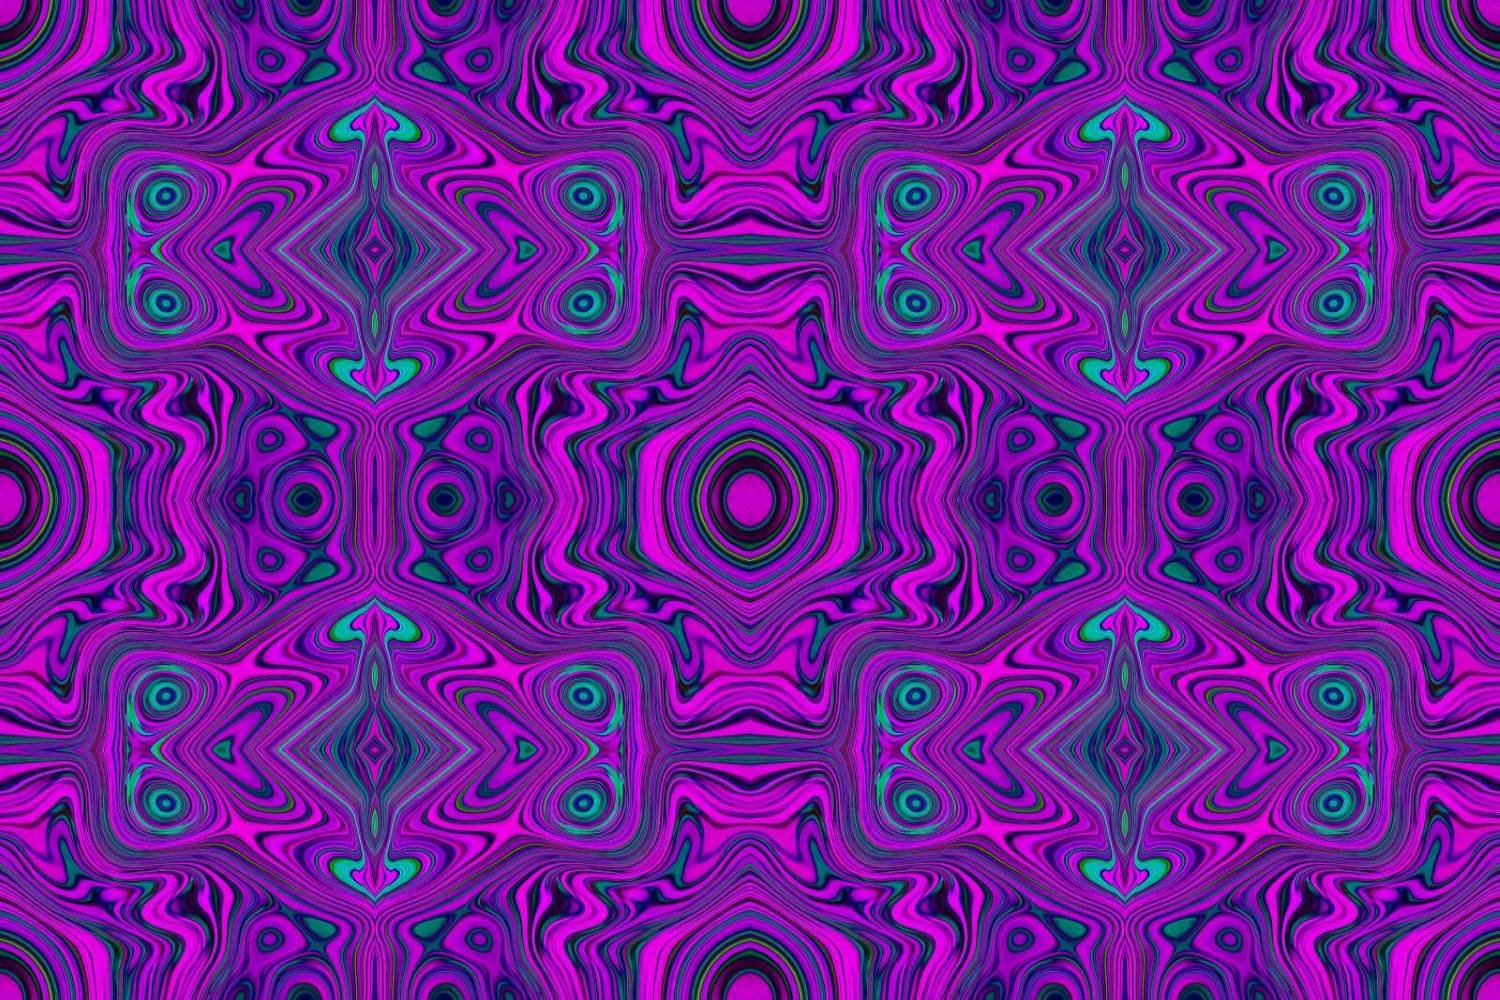 Trippy Retro Magenta and Black Abstract Pattern Collection